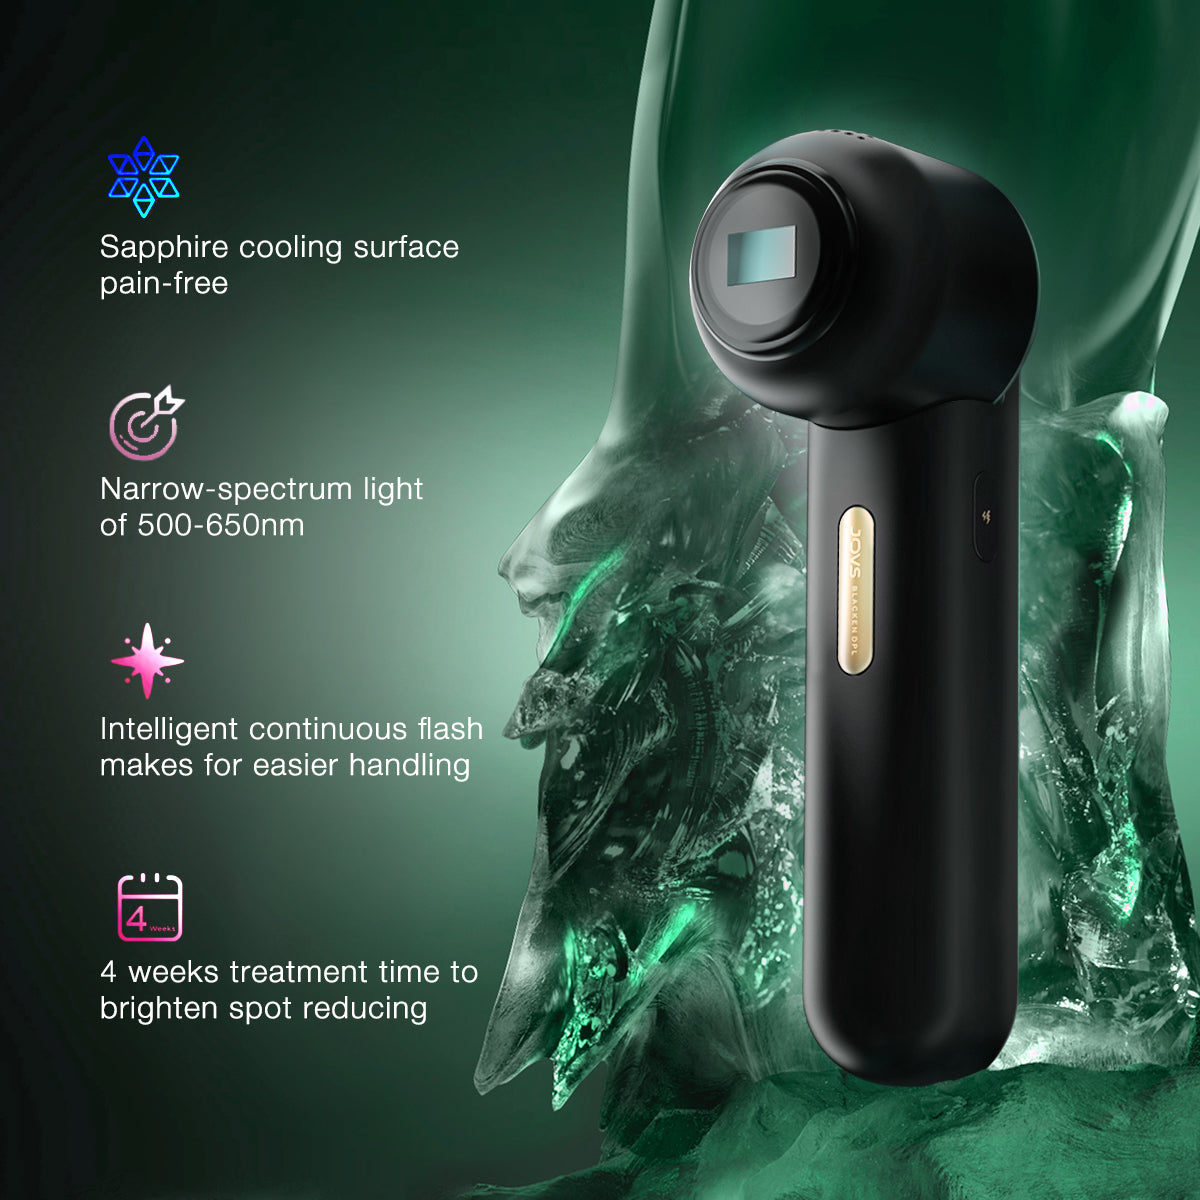 JOVS Blacken PRO DPL Photofacial Skincare Device with sapphire cooling surface and narrow-spectrum light technology.